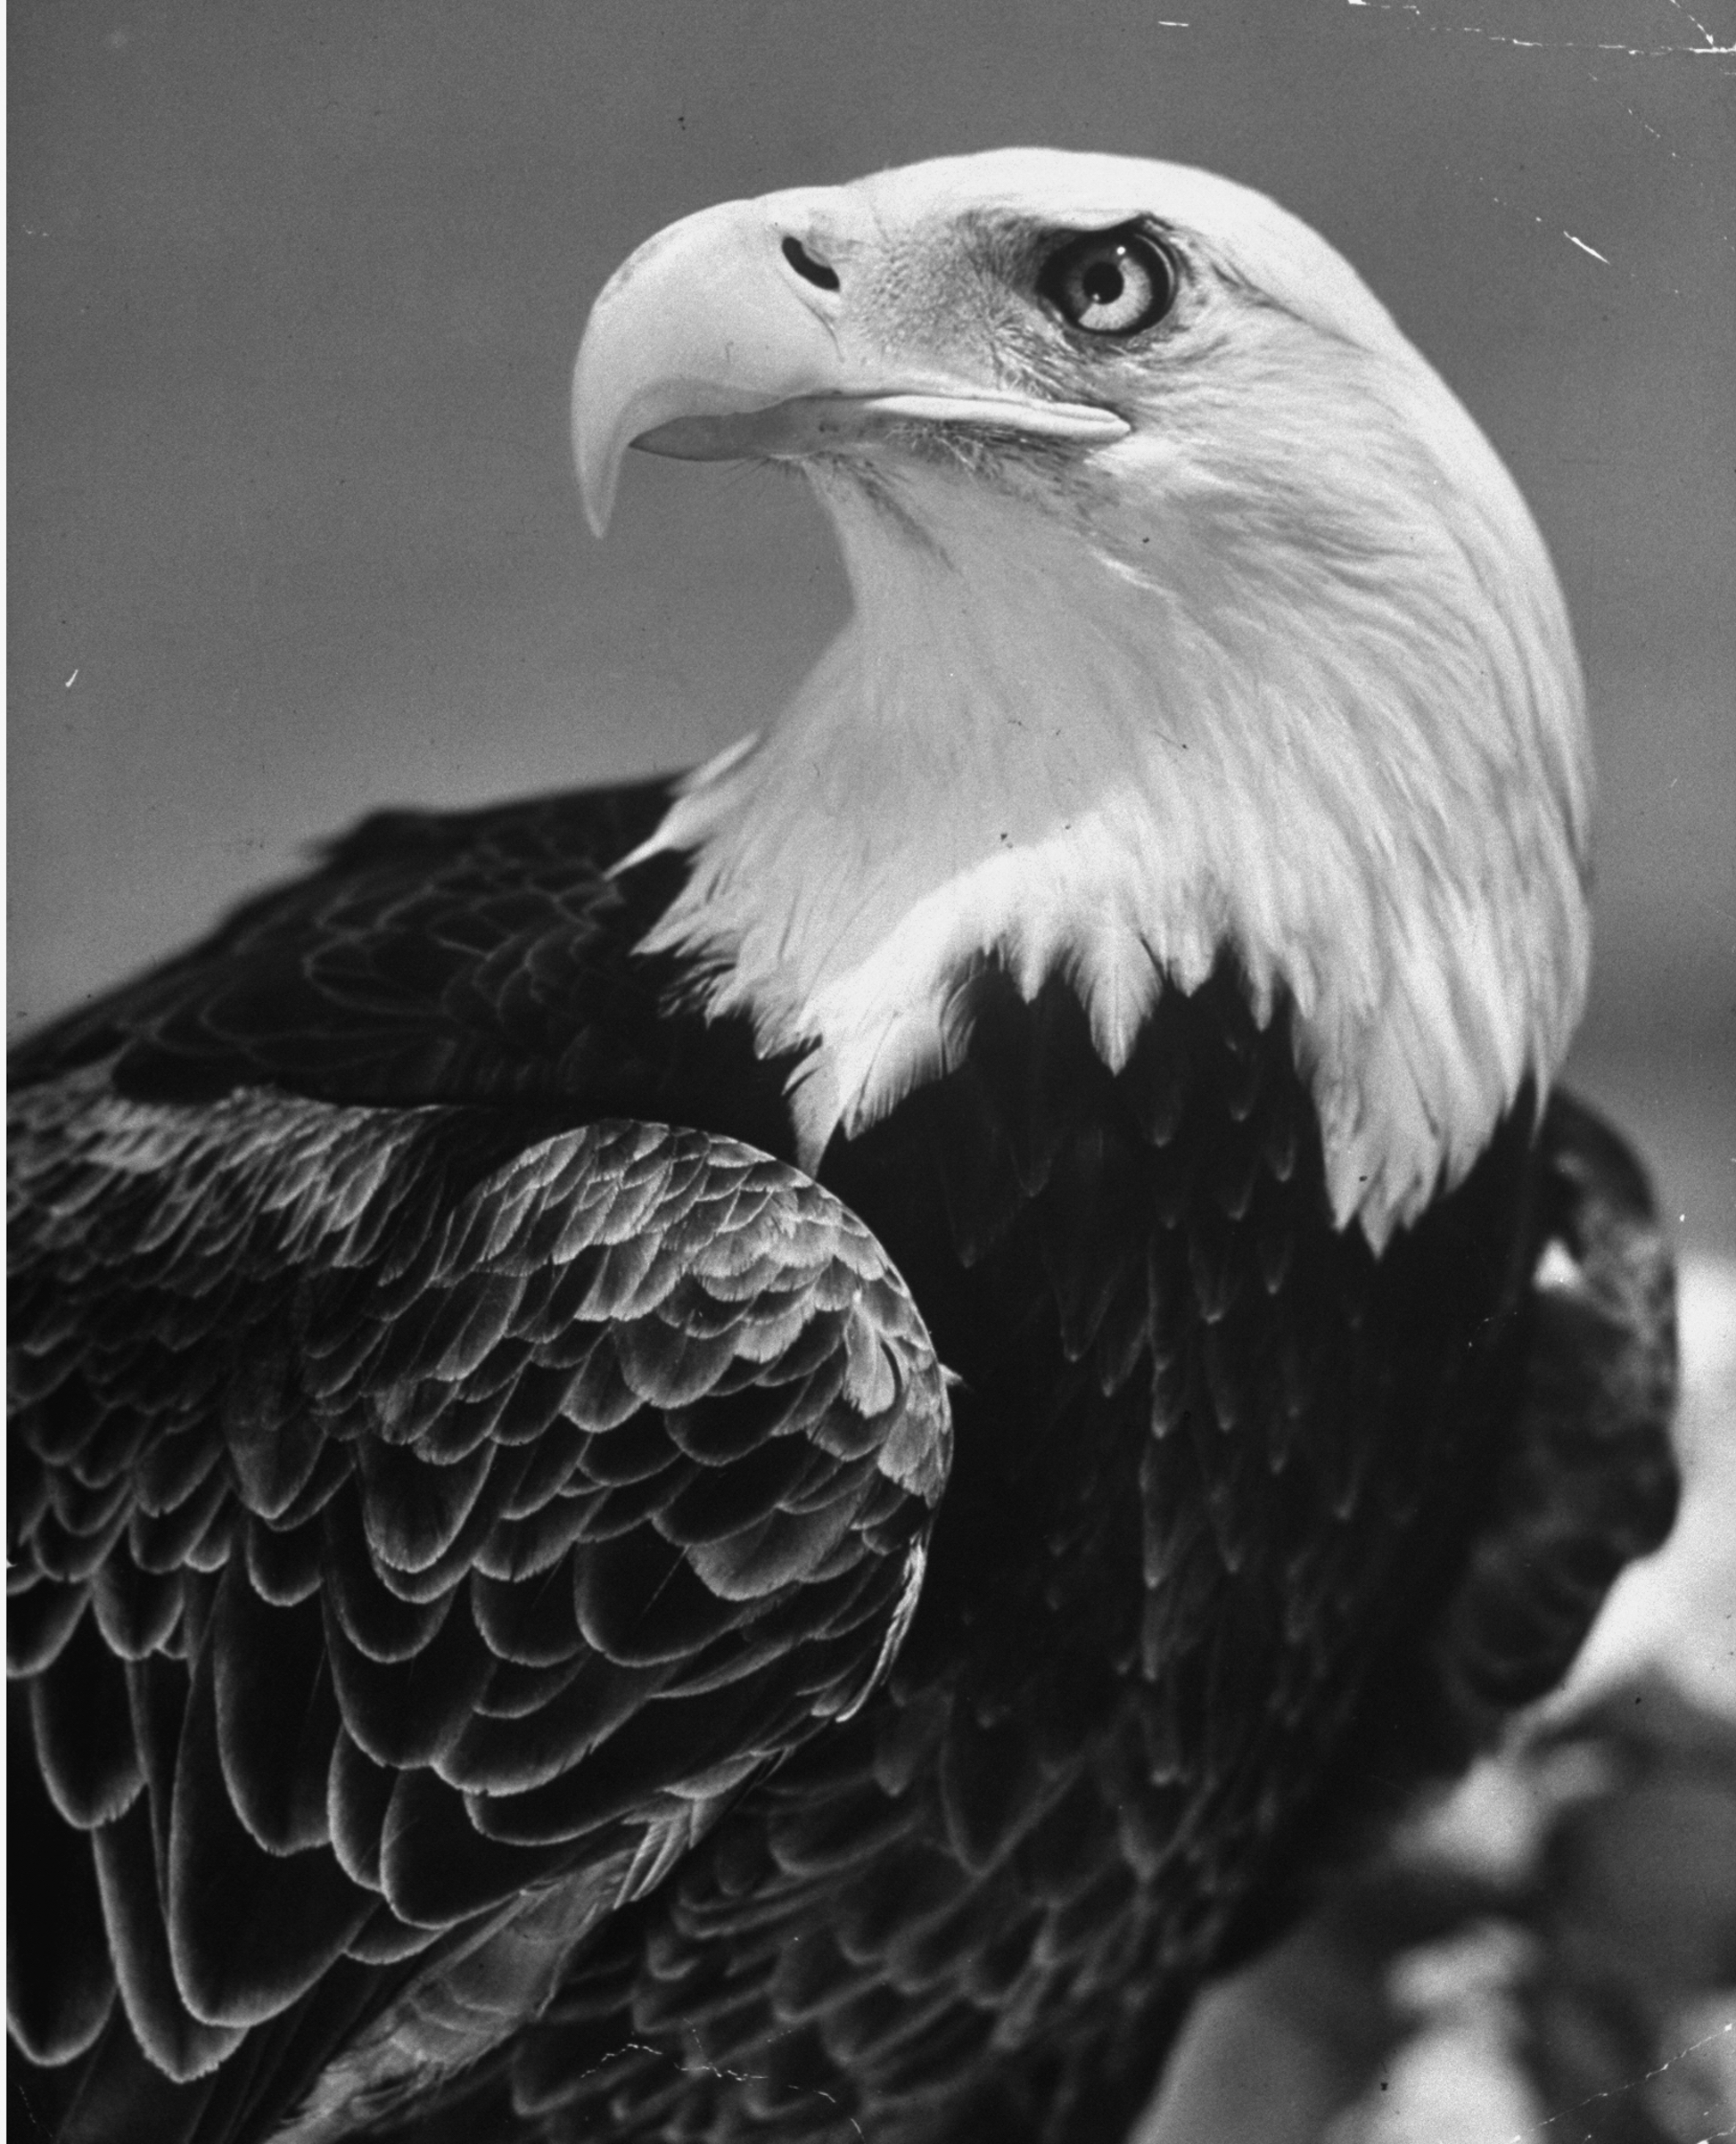 A trained American bald eagle posing for a picture in the 1940s. (J. R. Eyerman—The LIFE Picture Collection/Getty Images)